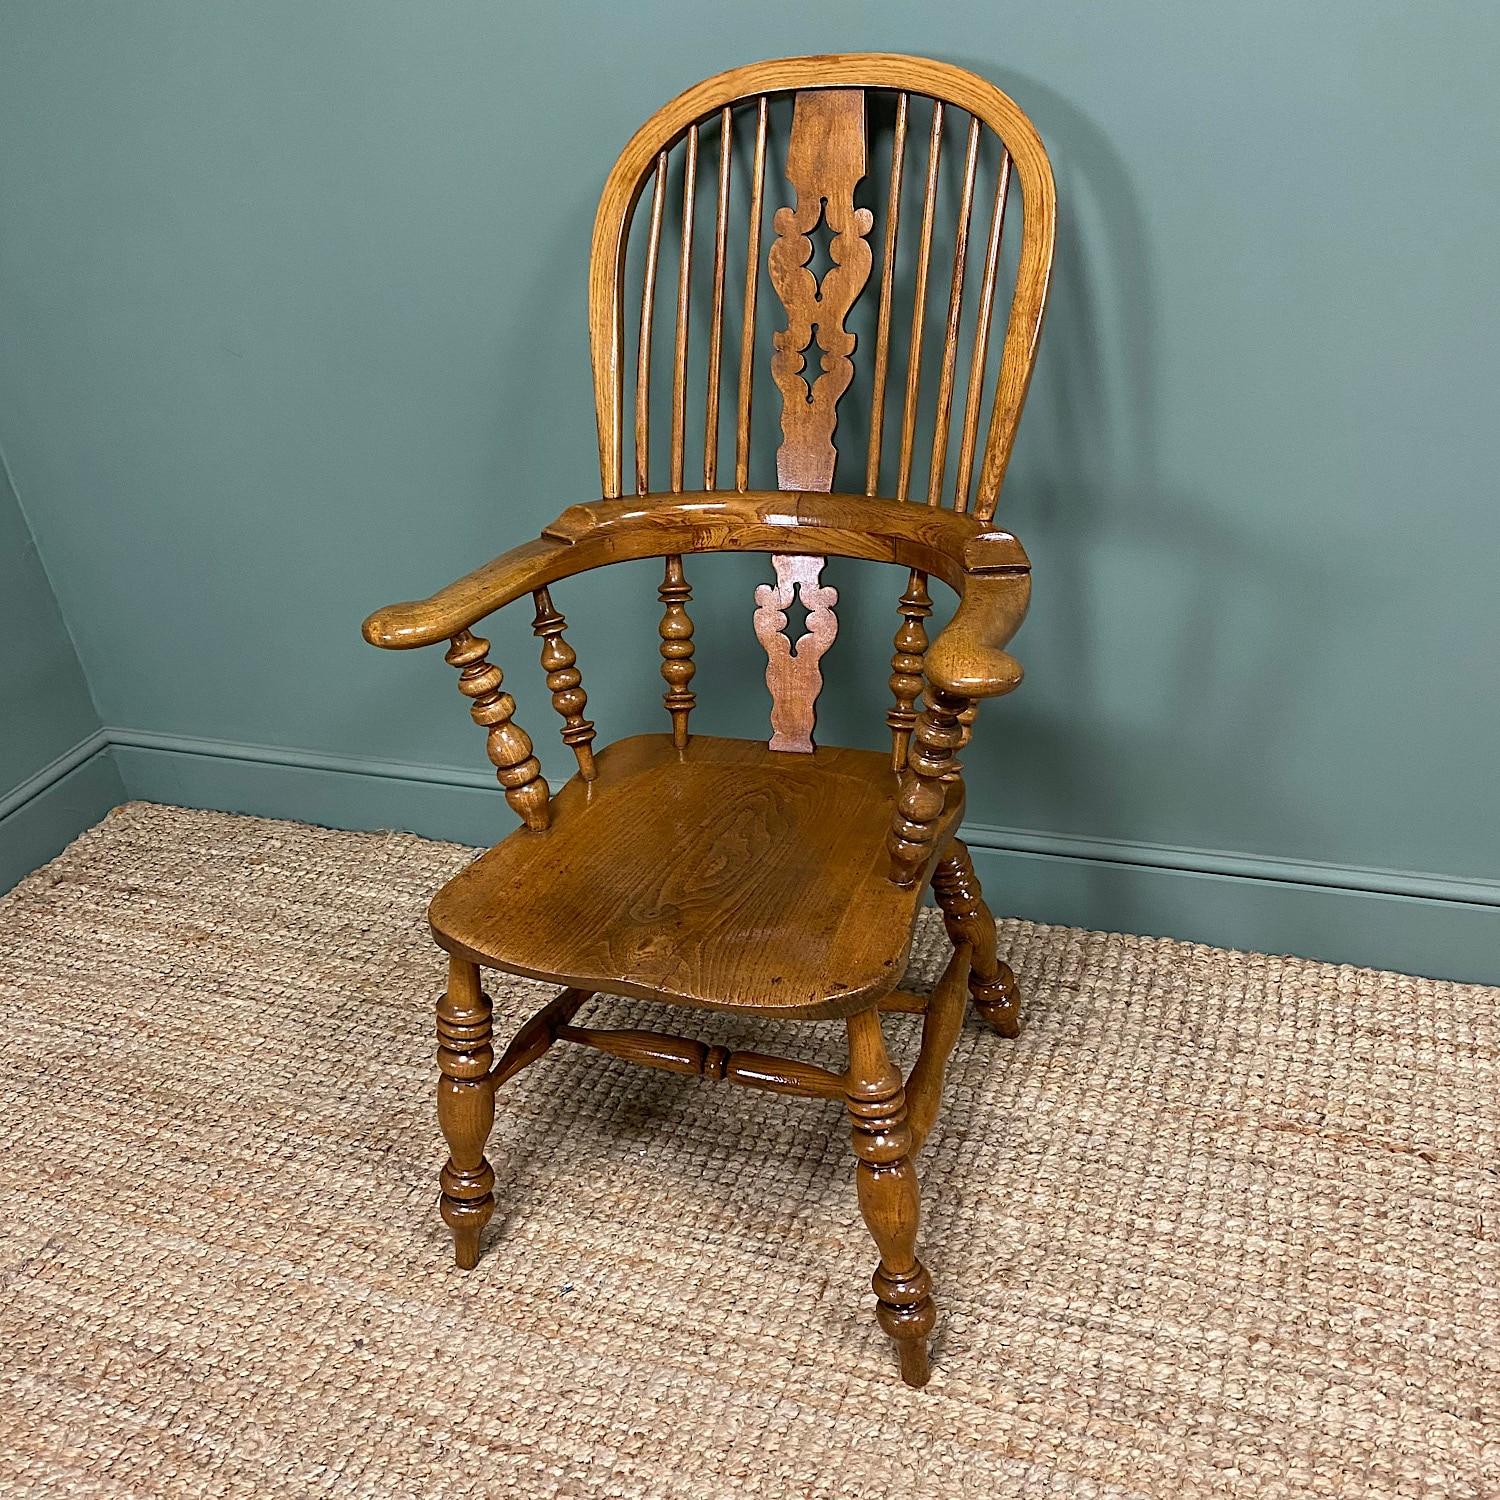 British Quality 19th Century Elm & Ash Broad Arm Antique Windsor Chair For Sale